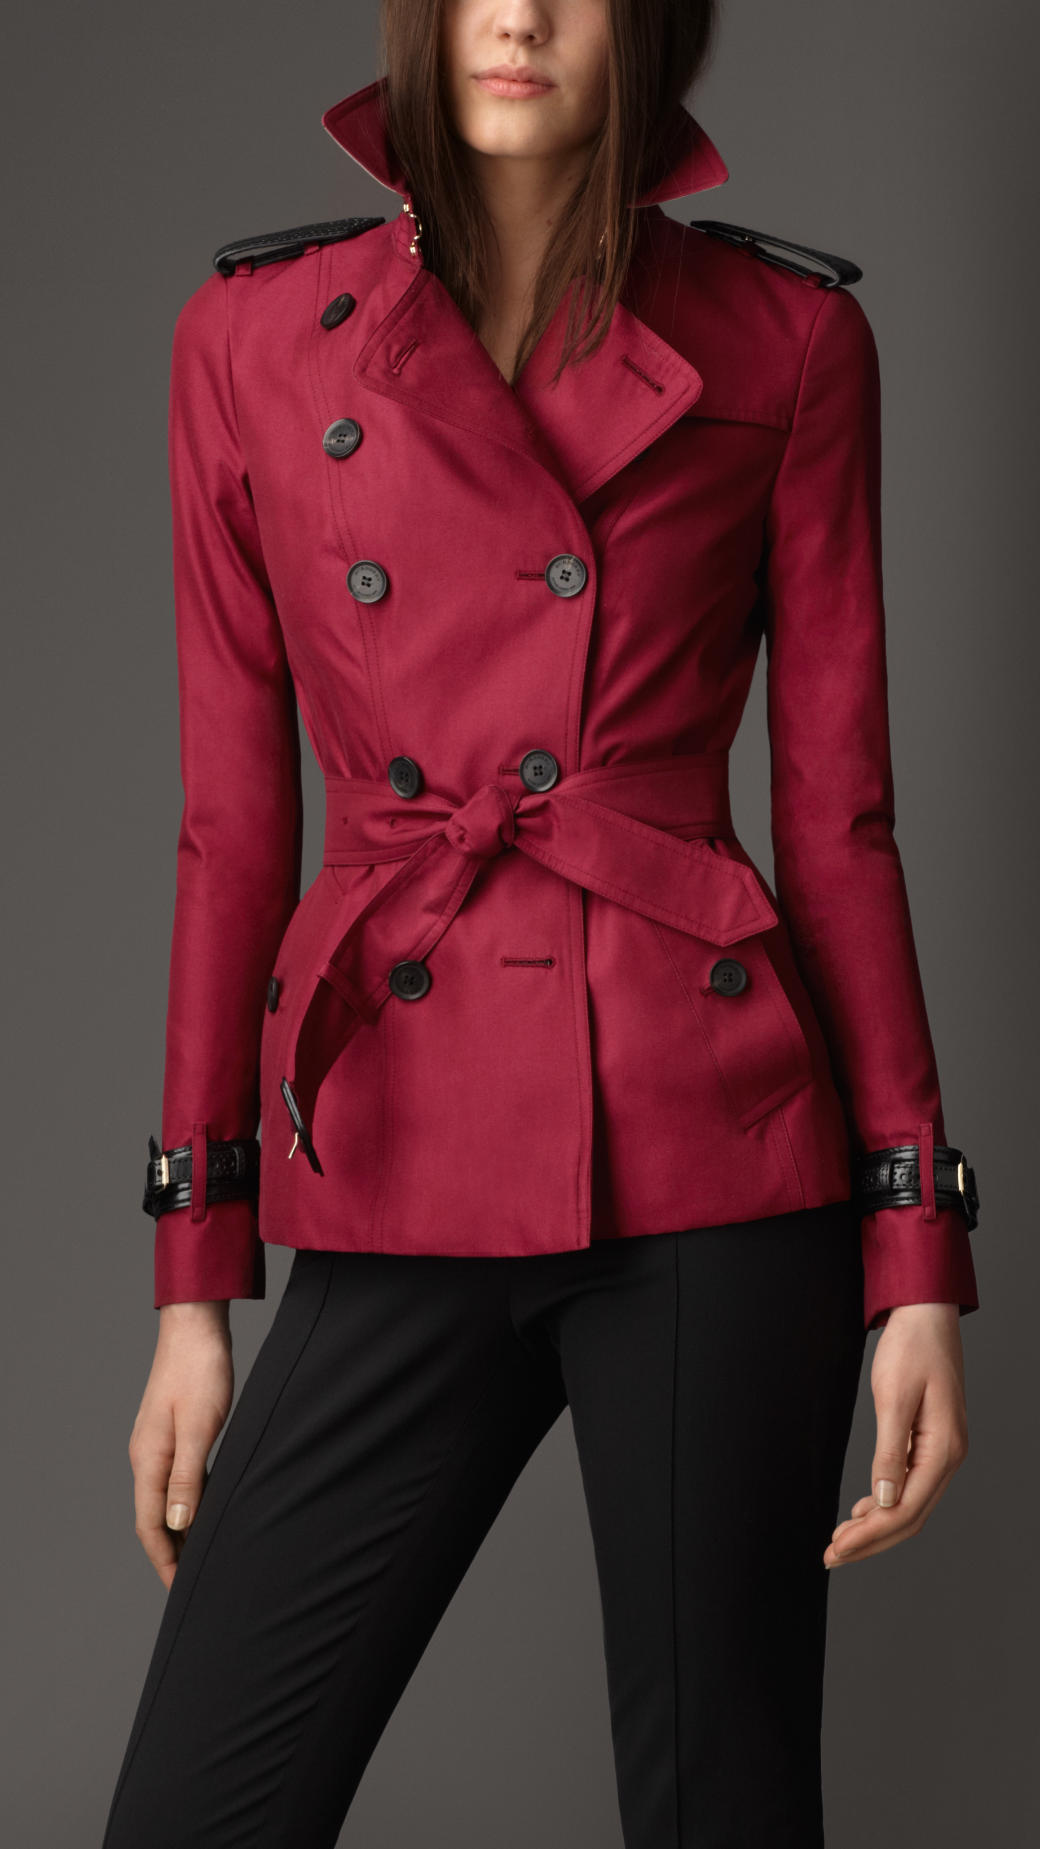 Lyst Burberry Laminated Leather Trench Coat In Red | Images and Photos ...